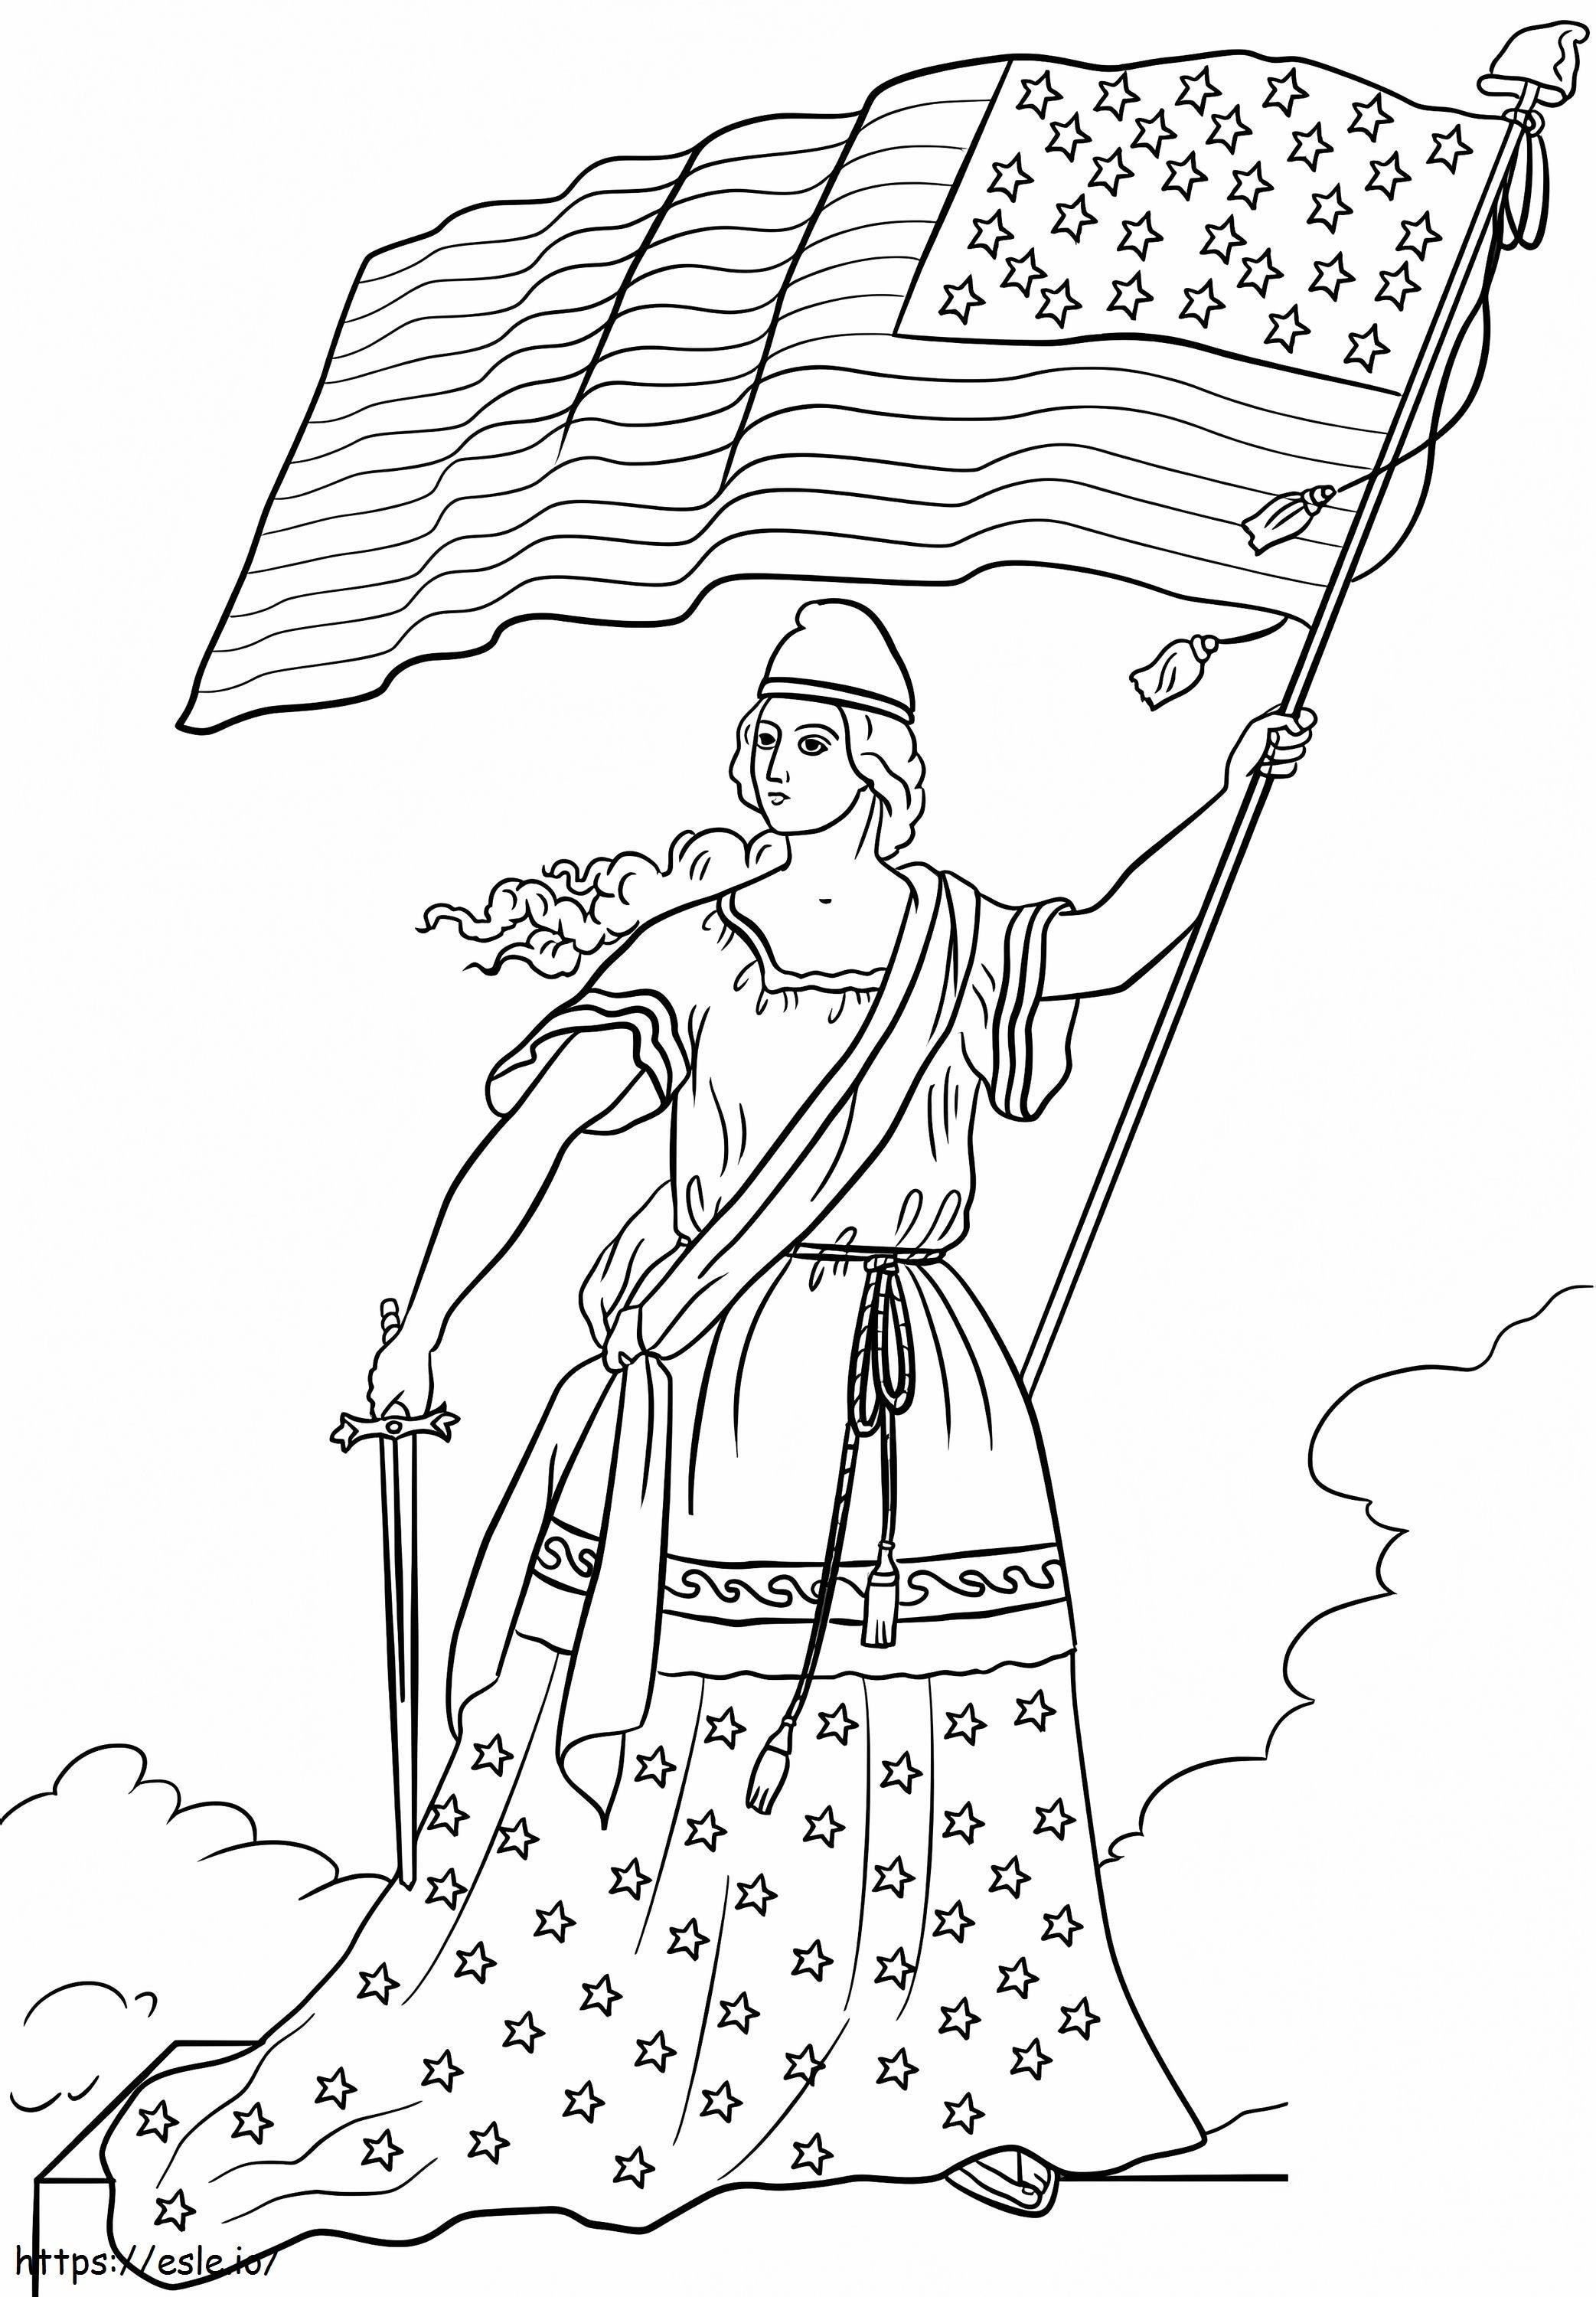 American Flag Lady coloring page